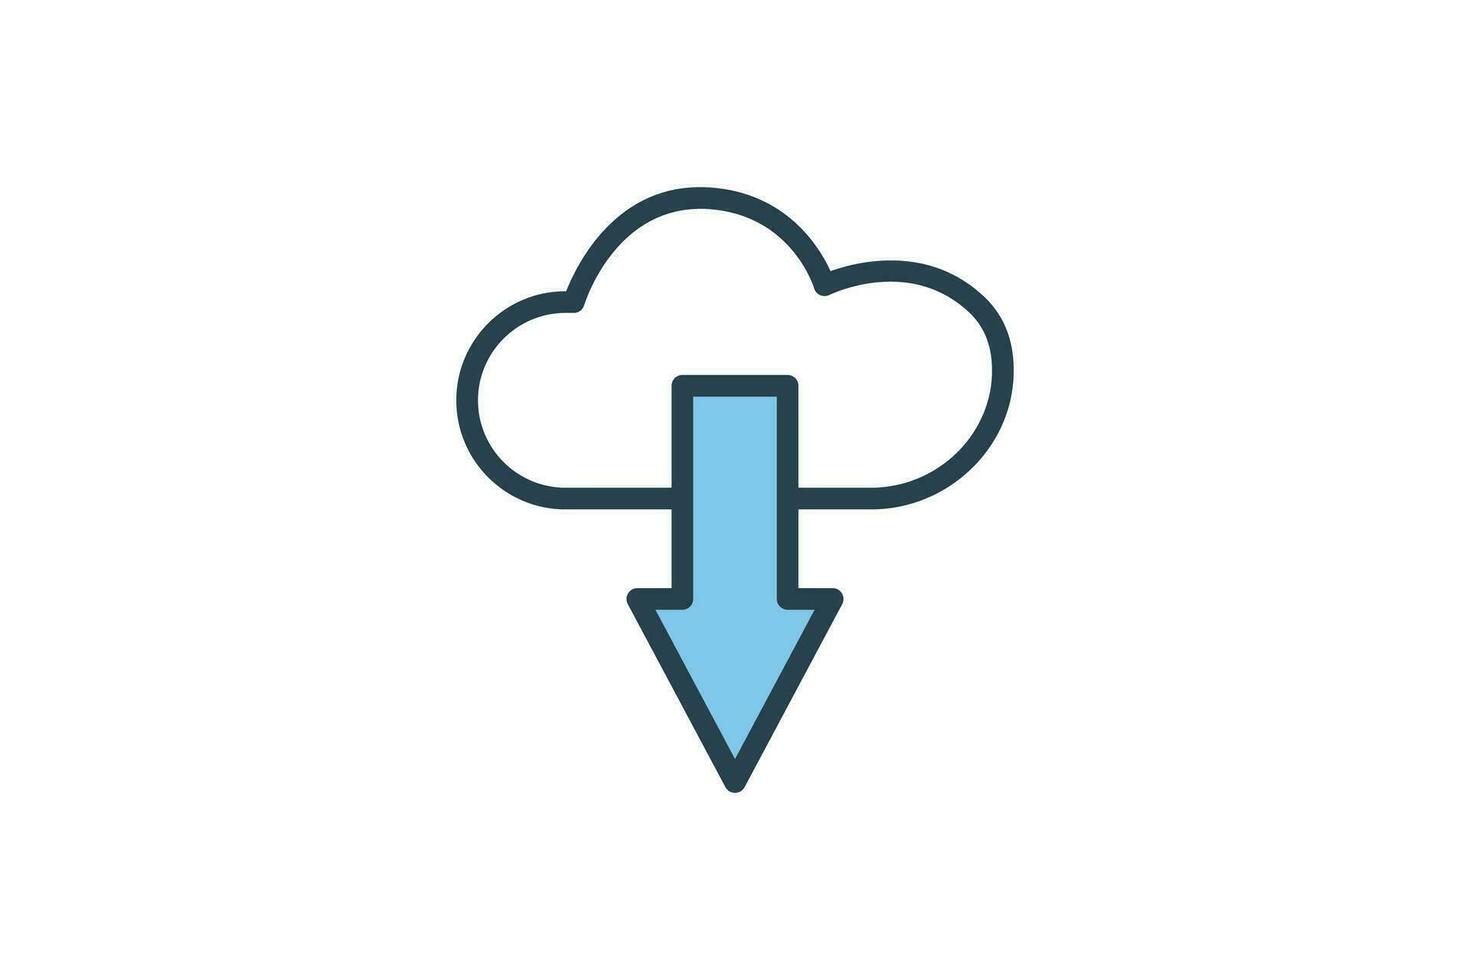 Cloud download Icon. suitable for web site design, app,user interfaces. flat line icon style. Simple vector design editable